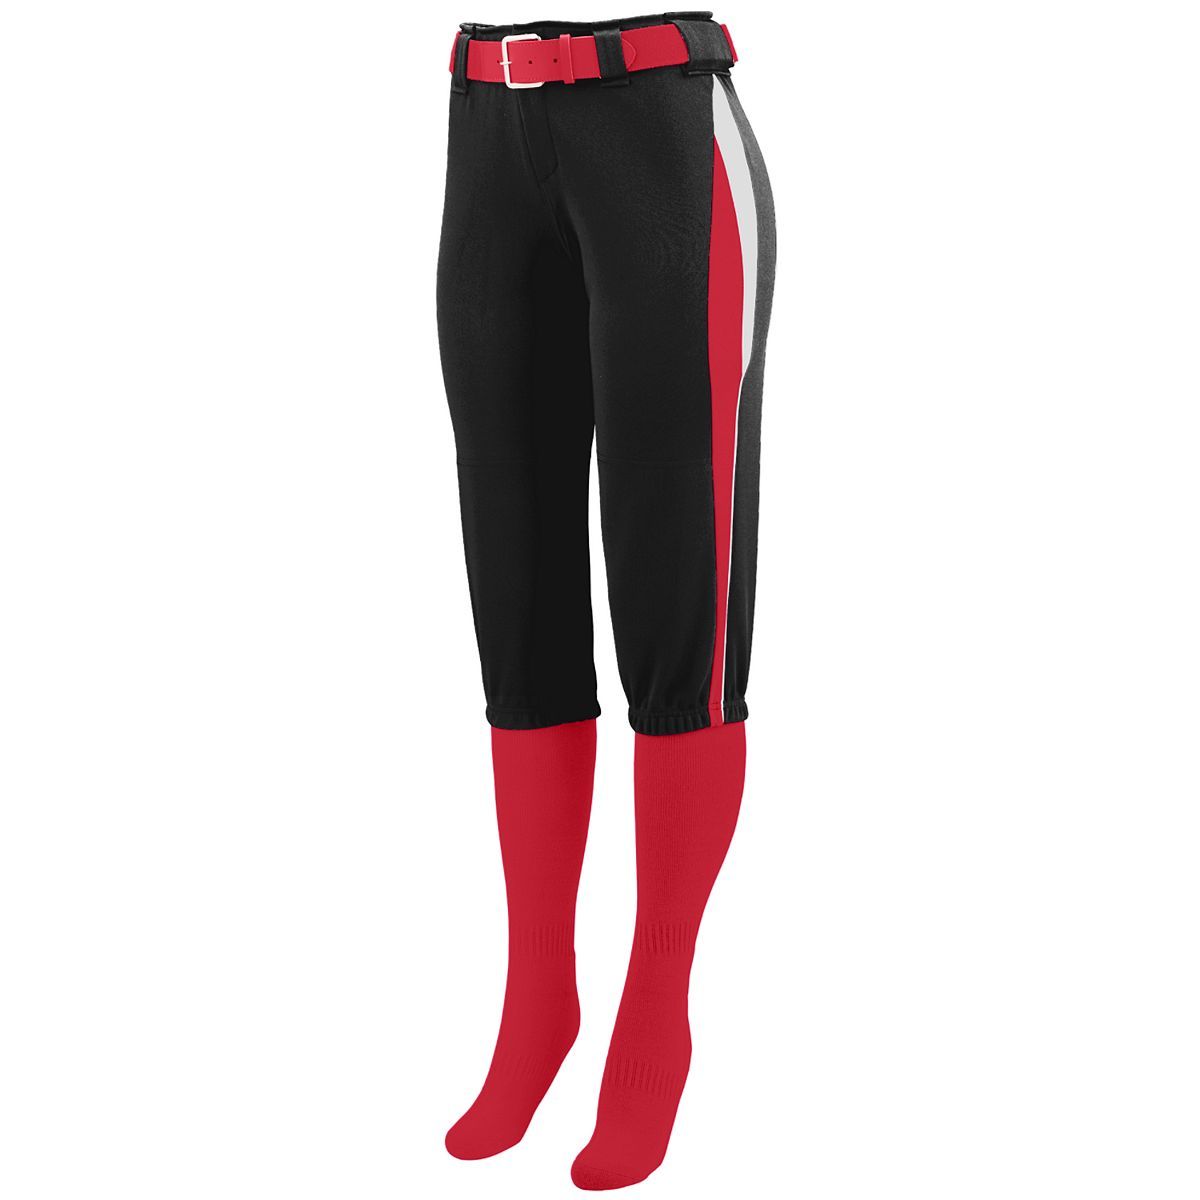 Augusta Sportswear Ladies Comet Pant in Black/Red/White  -Part of the Ladies, Ladies-Pants, Pants, Augusta-Products, Softball product lines at KanaleyCreations.com